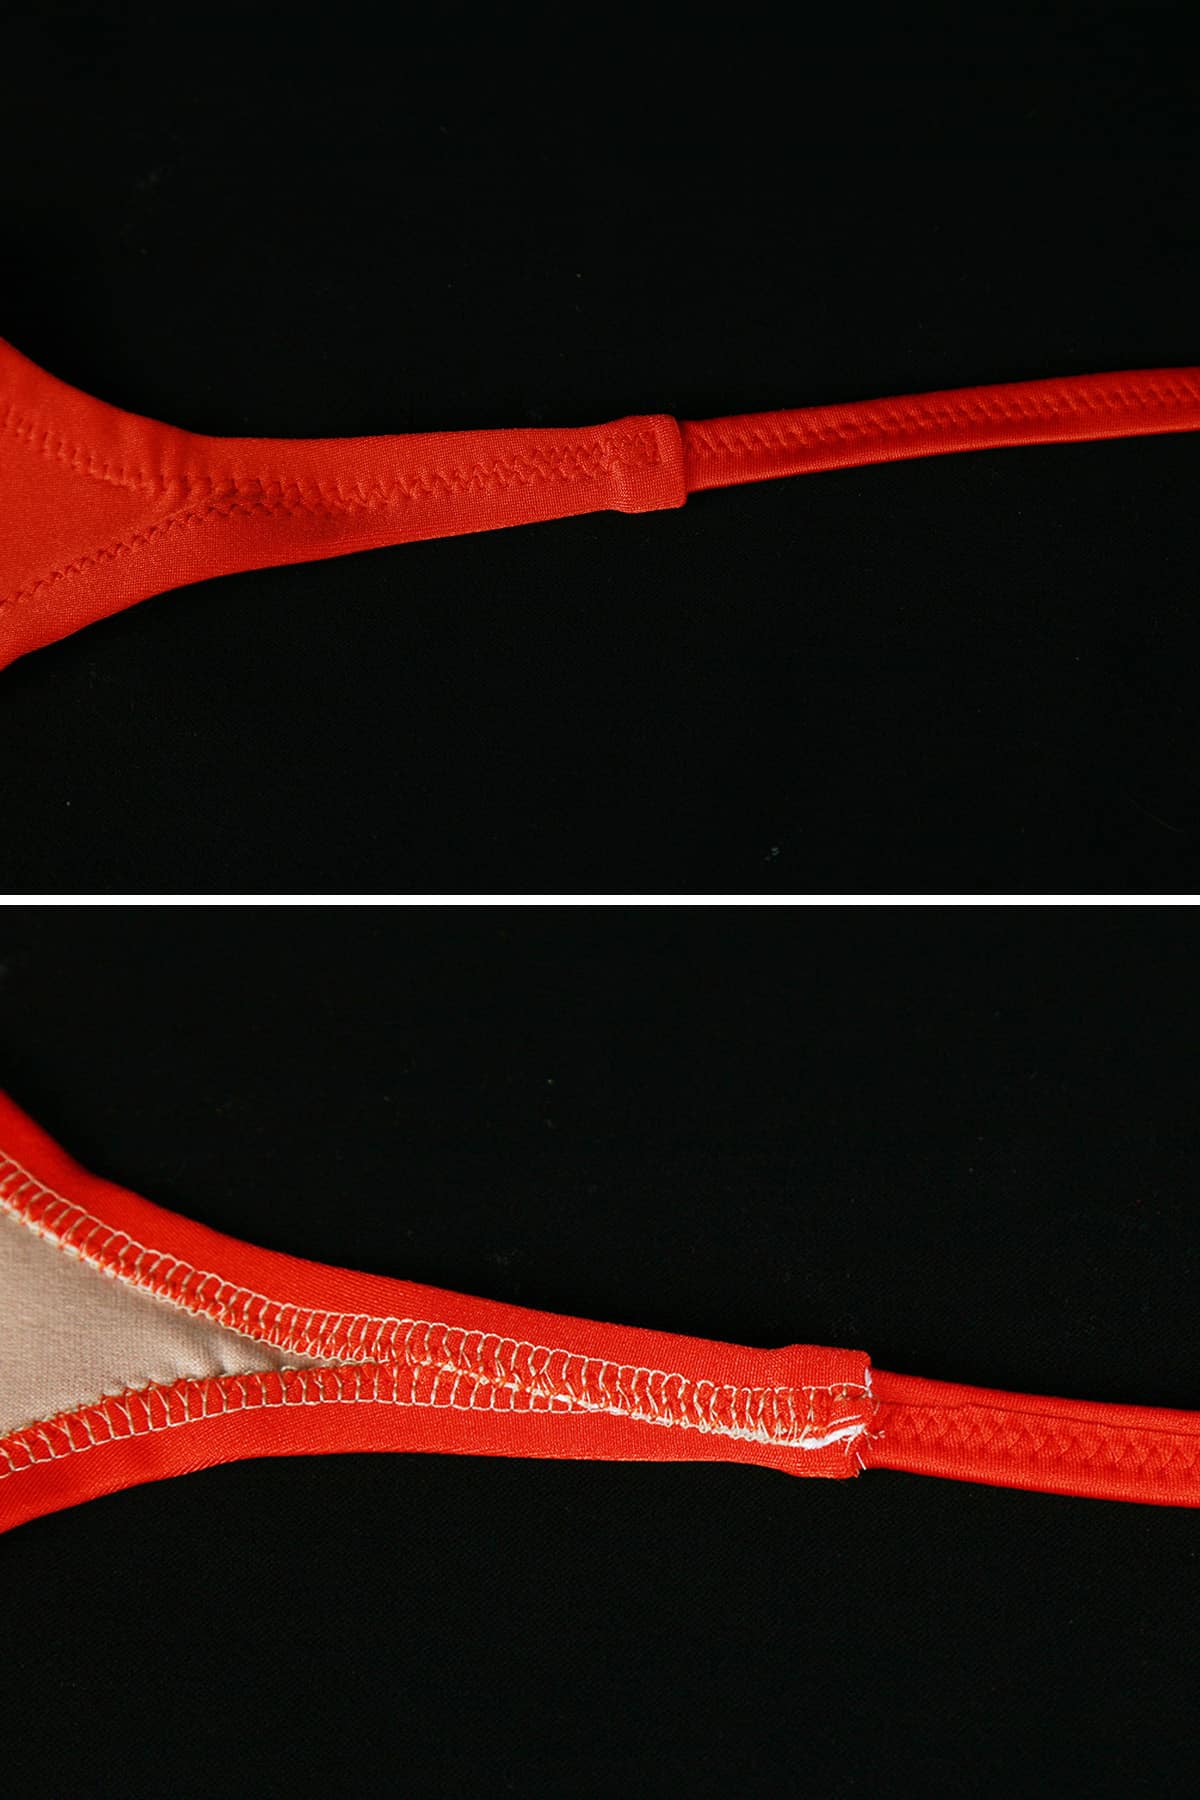 Front and back views of a strap that's been sewn to a skating dress.